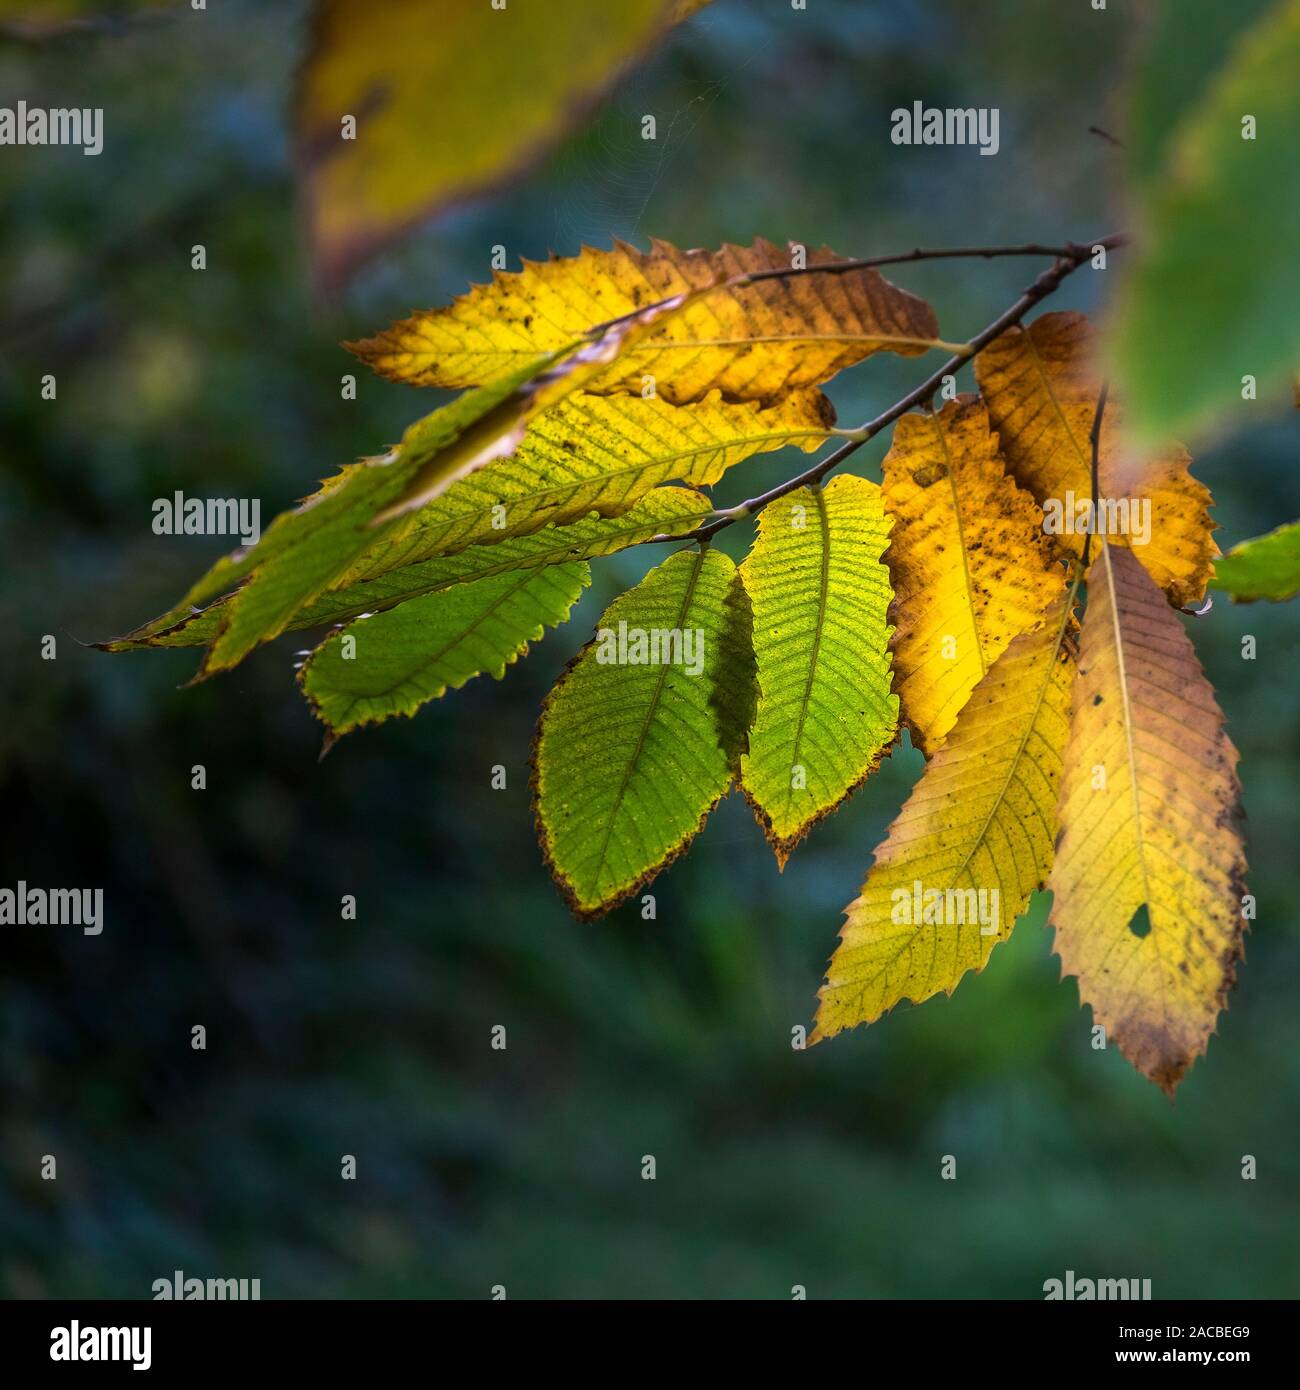 Castanea sativa the leaves of a Sweet Chestnut tree in autumn. Stock Photo